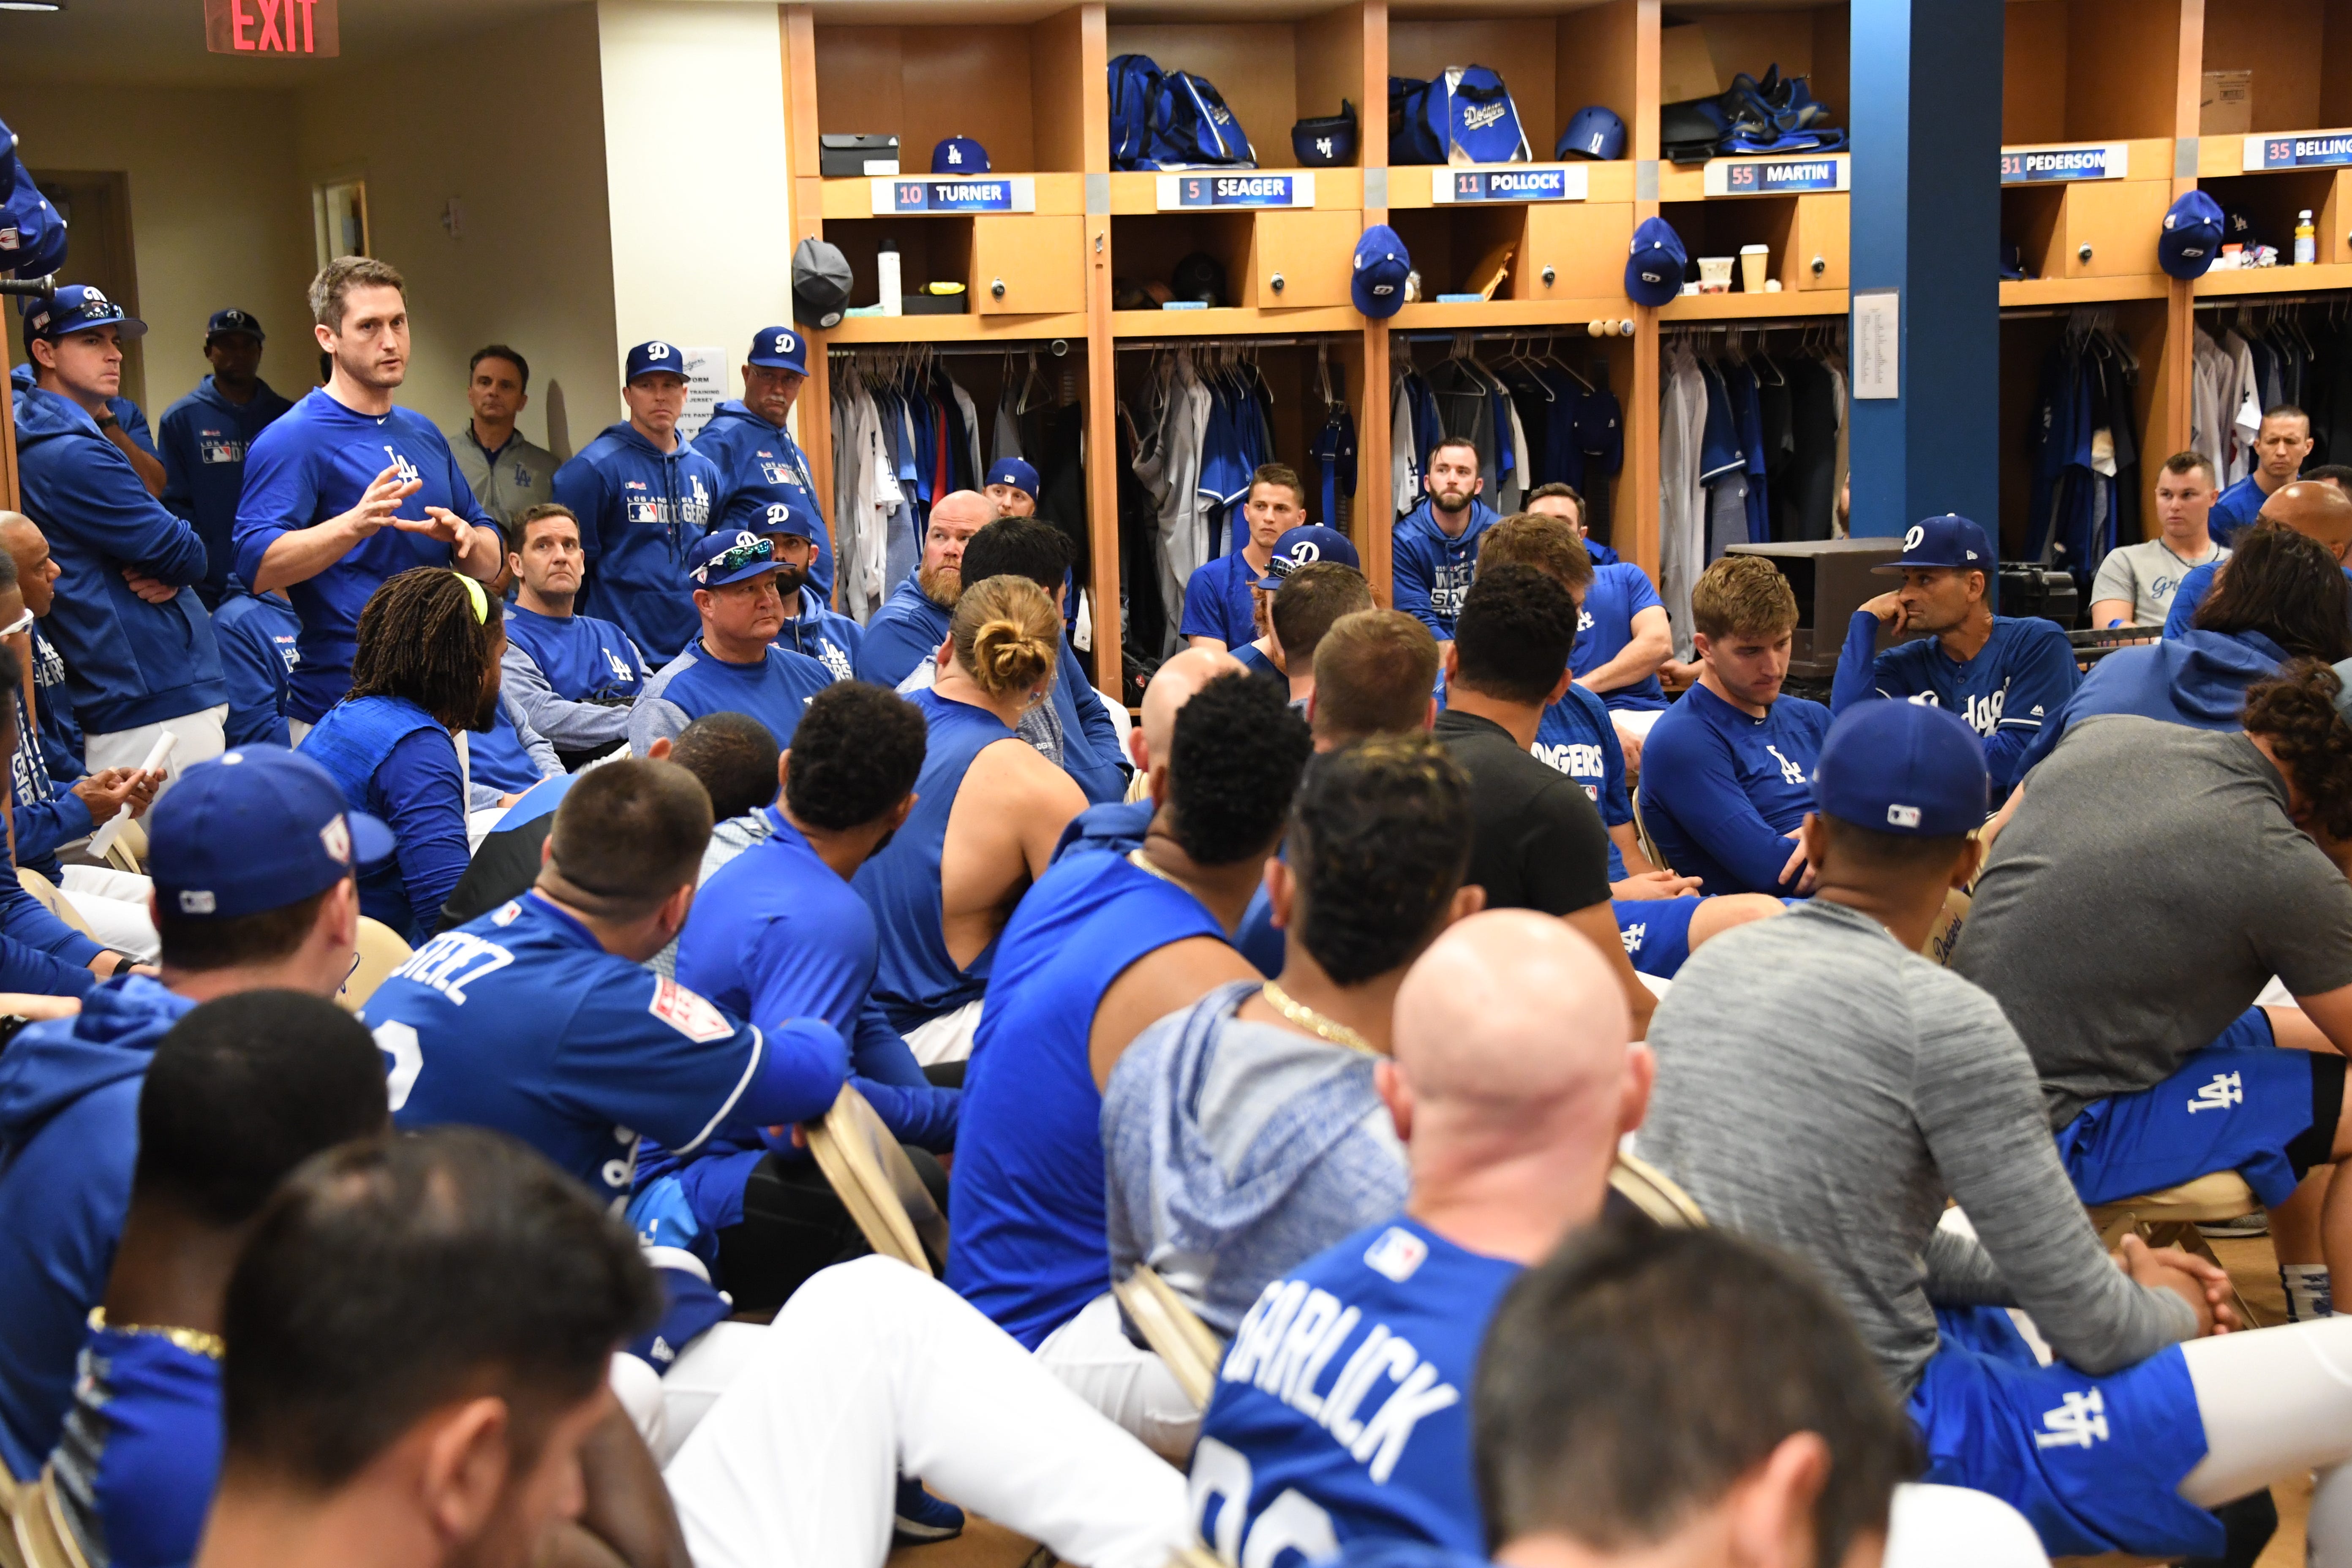 How chemistry, culture and a welcoming clubhouse helped the Dodgers make  history, by Rowan Kavner